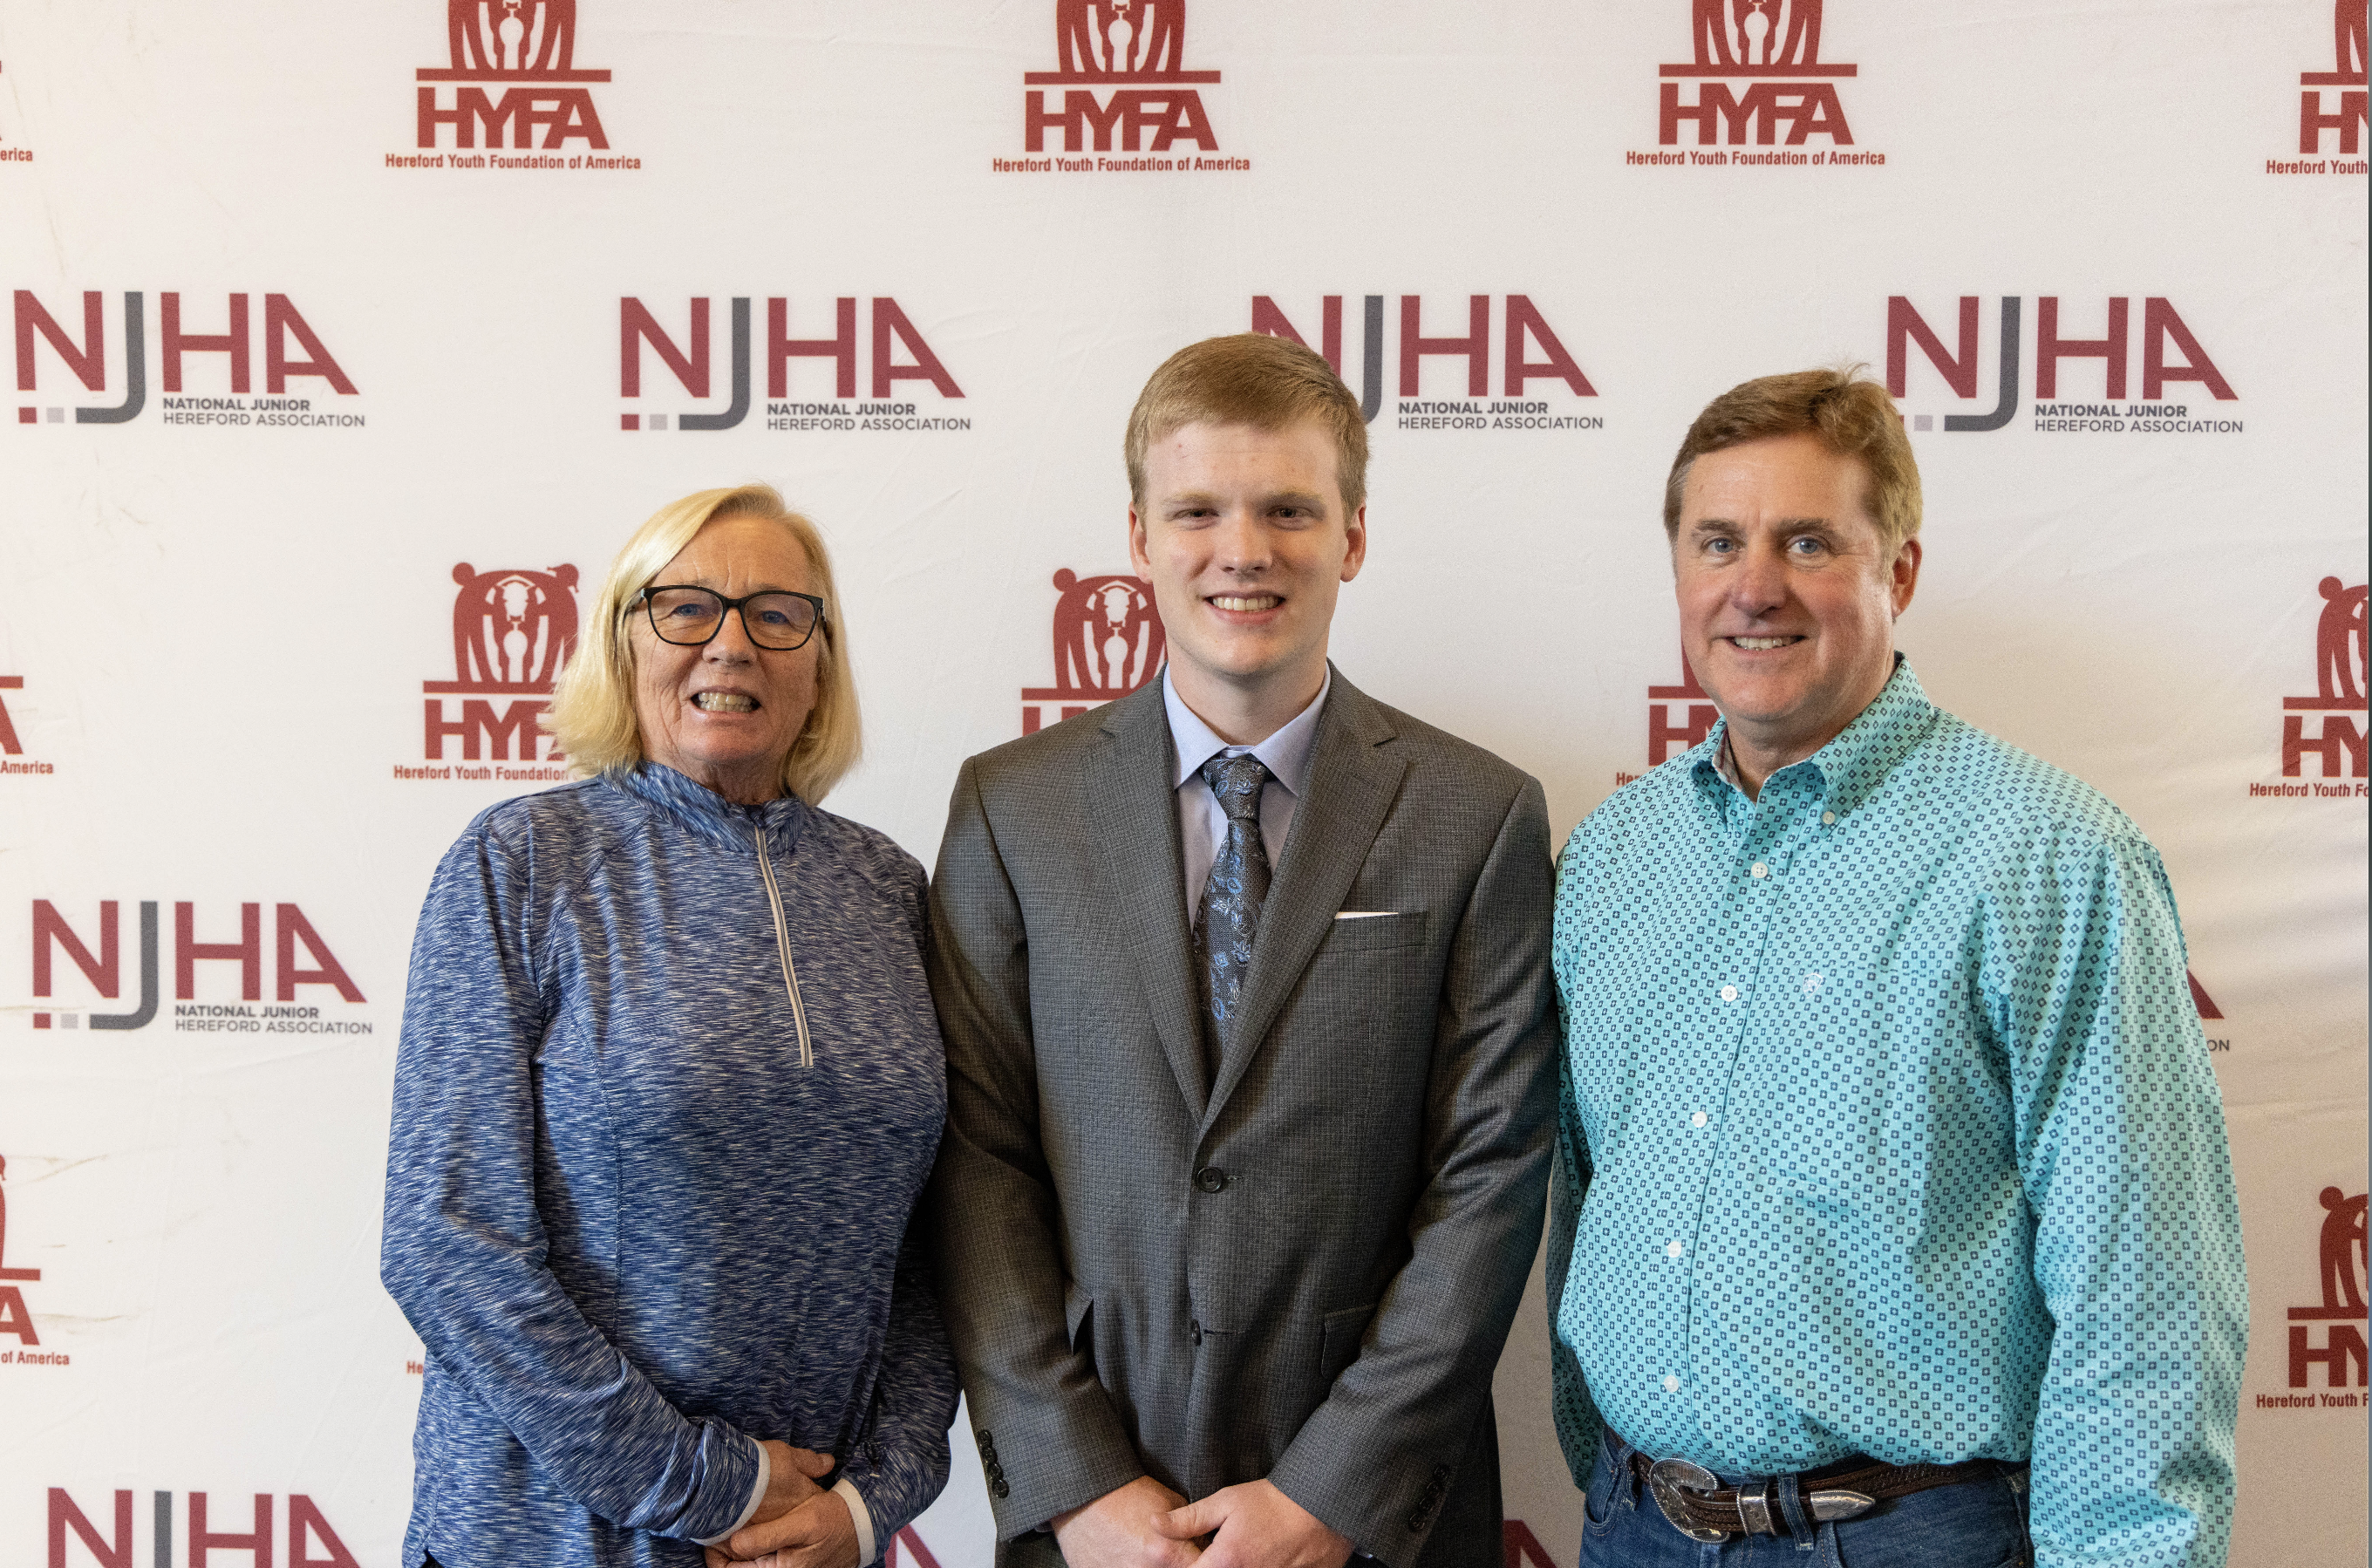 Two Scholarships Awarded From the Hereford Youth Foundation of America